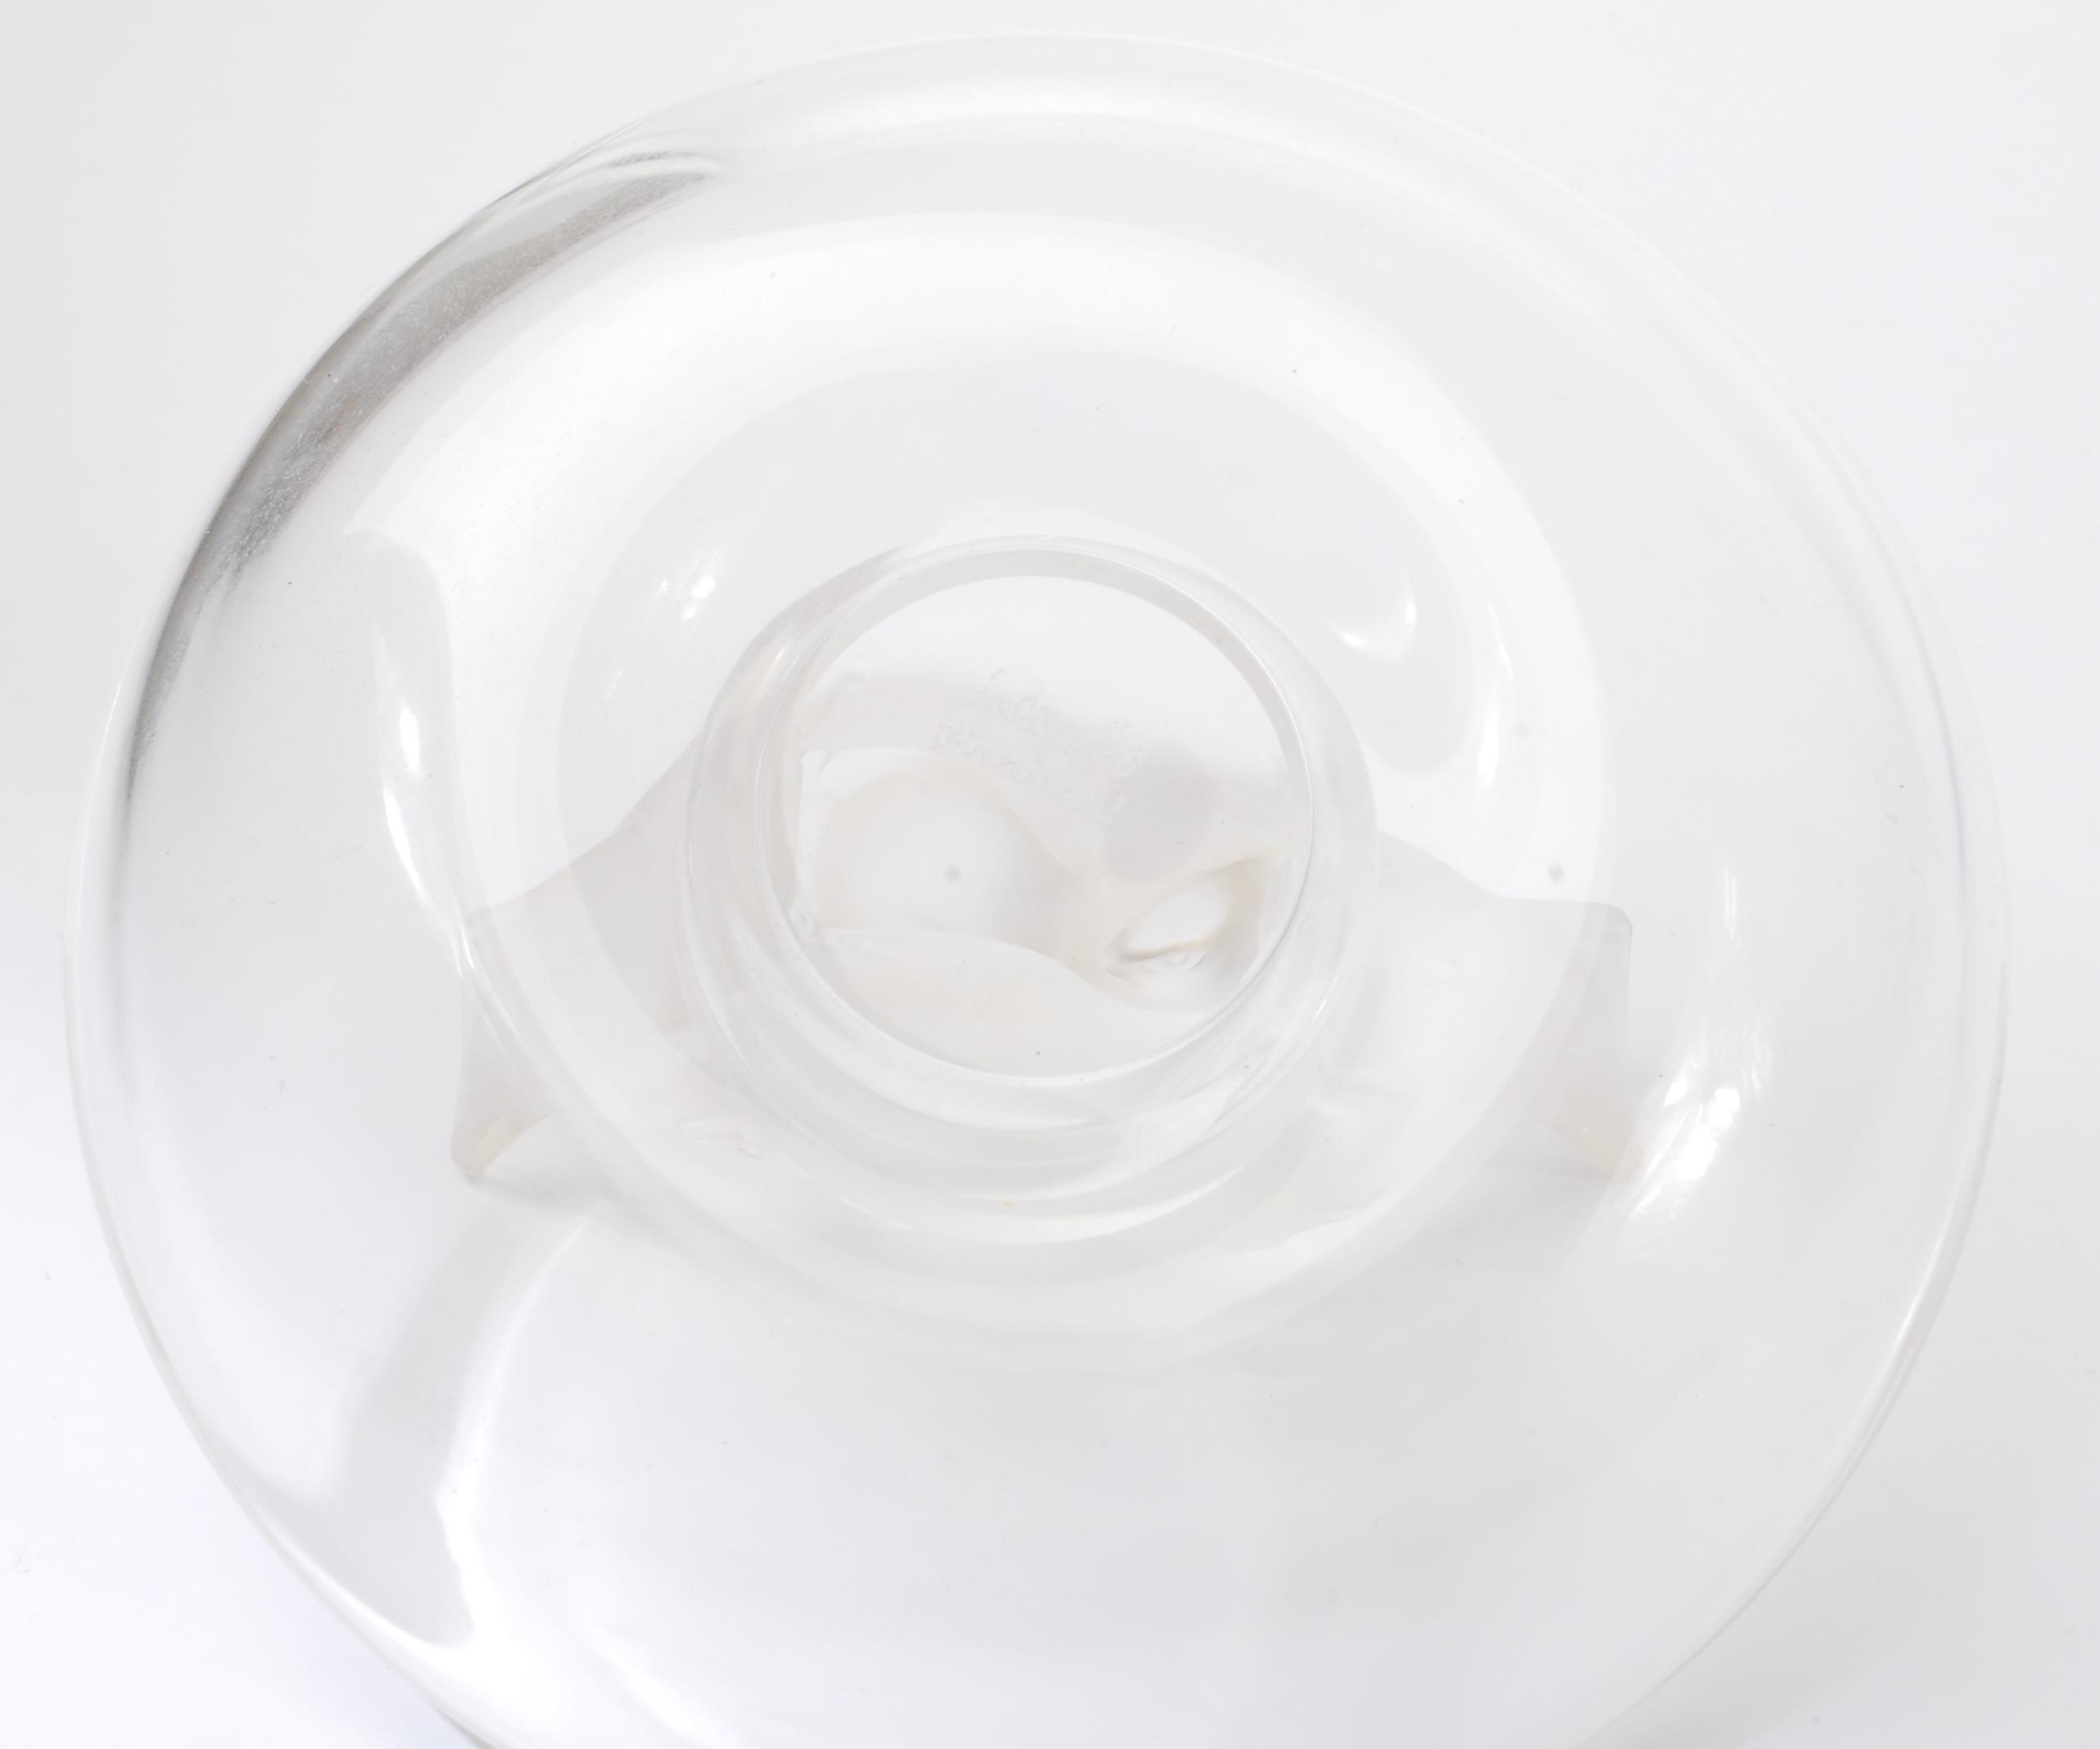 LALIQUE - 20TH CENTURY GLASS BIRDS IN CIRCULAR DISH - Image 5 of 5